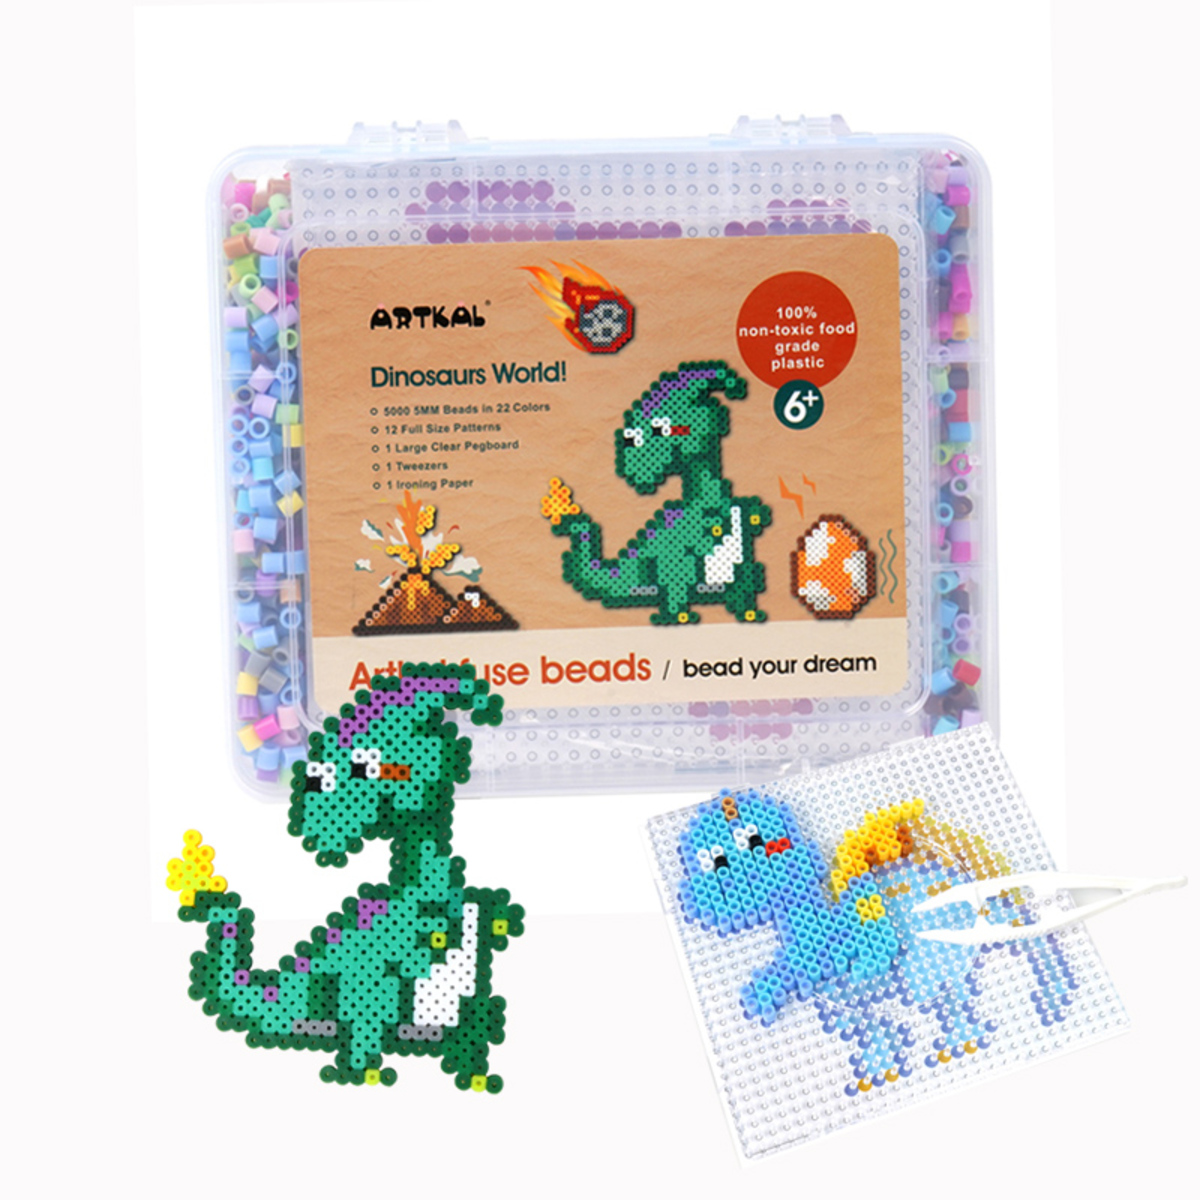 Dinosaur Artkal Beads Projects Pattern Fuse Bead Gifts